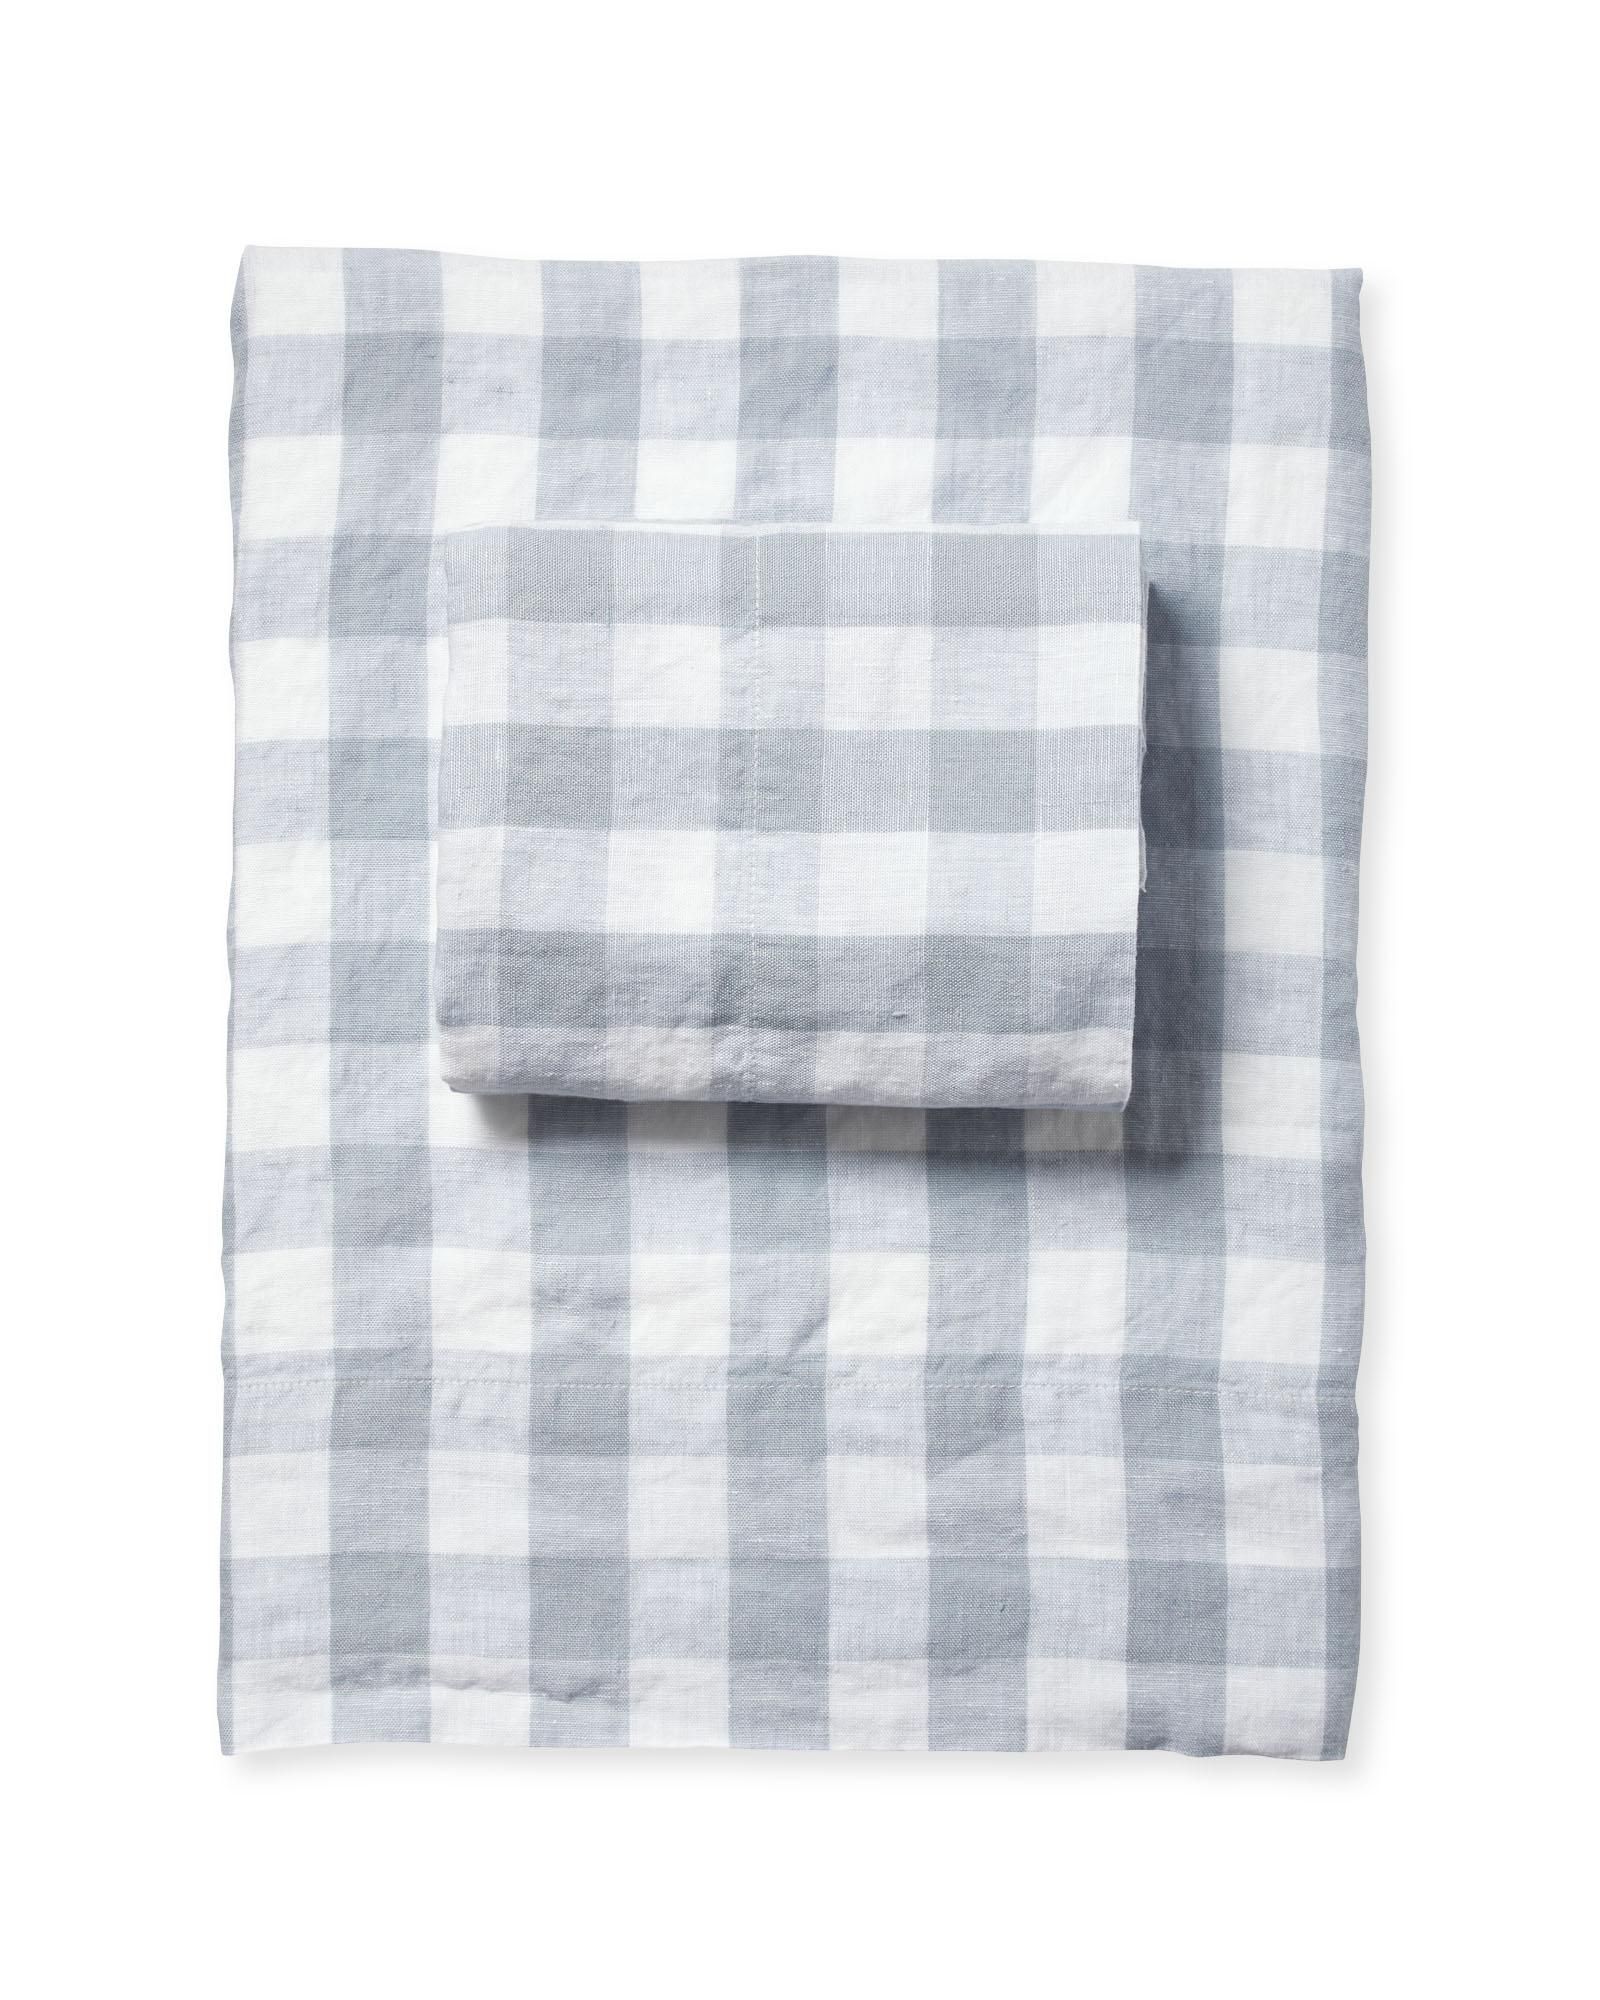 Hyannis Linen Sheet Set | Serena and Lily